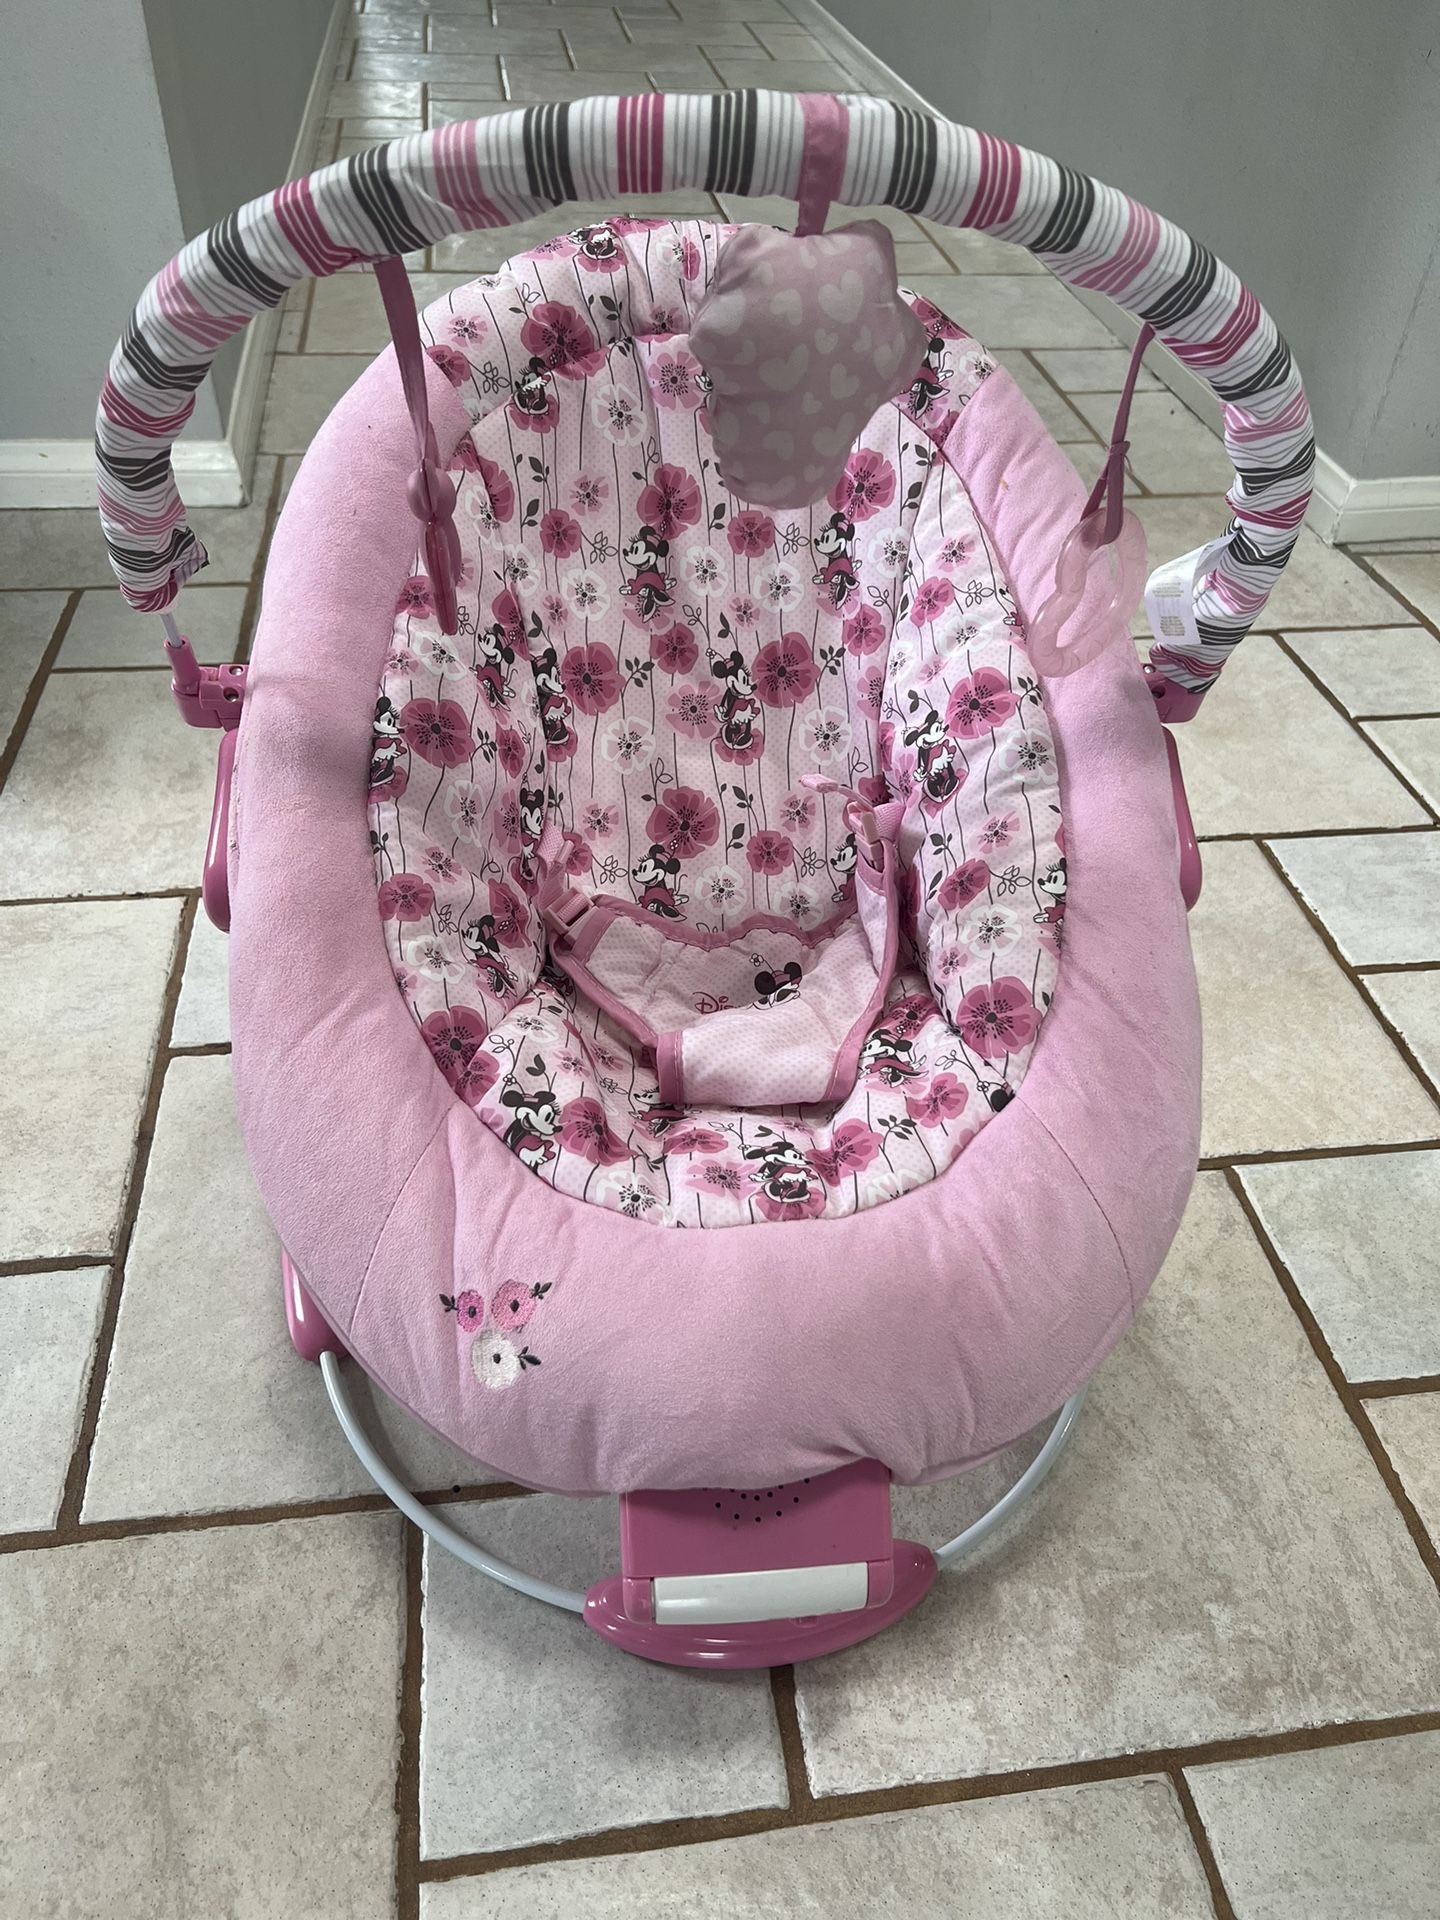 Baby bouncer with vibrator - Minnie Mouse Theme